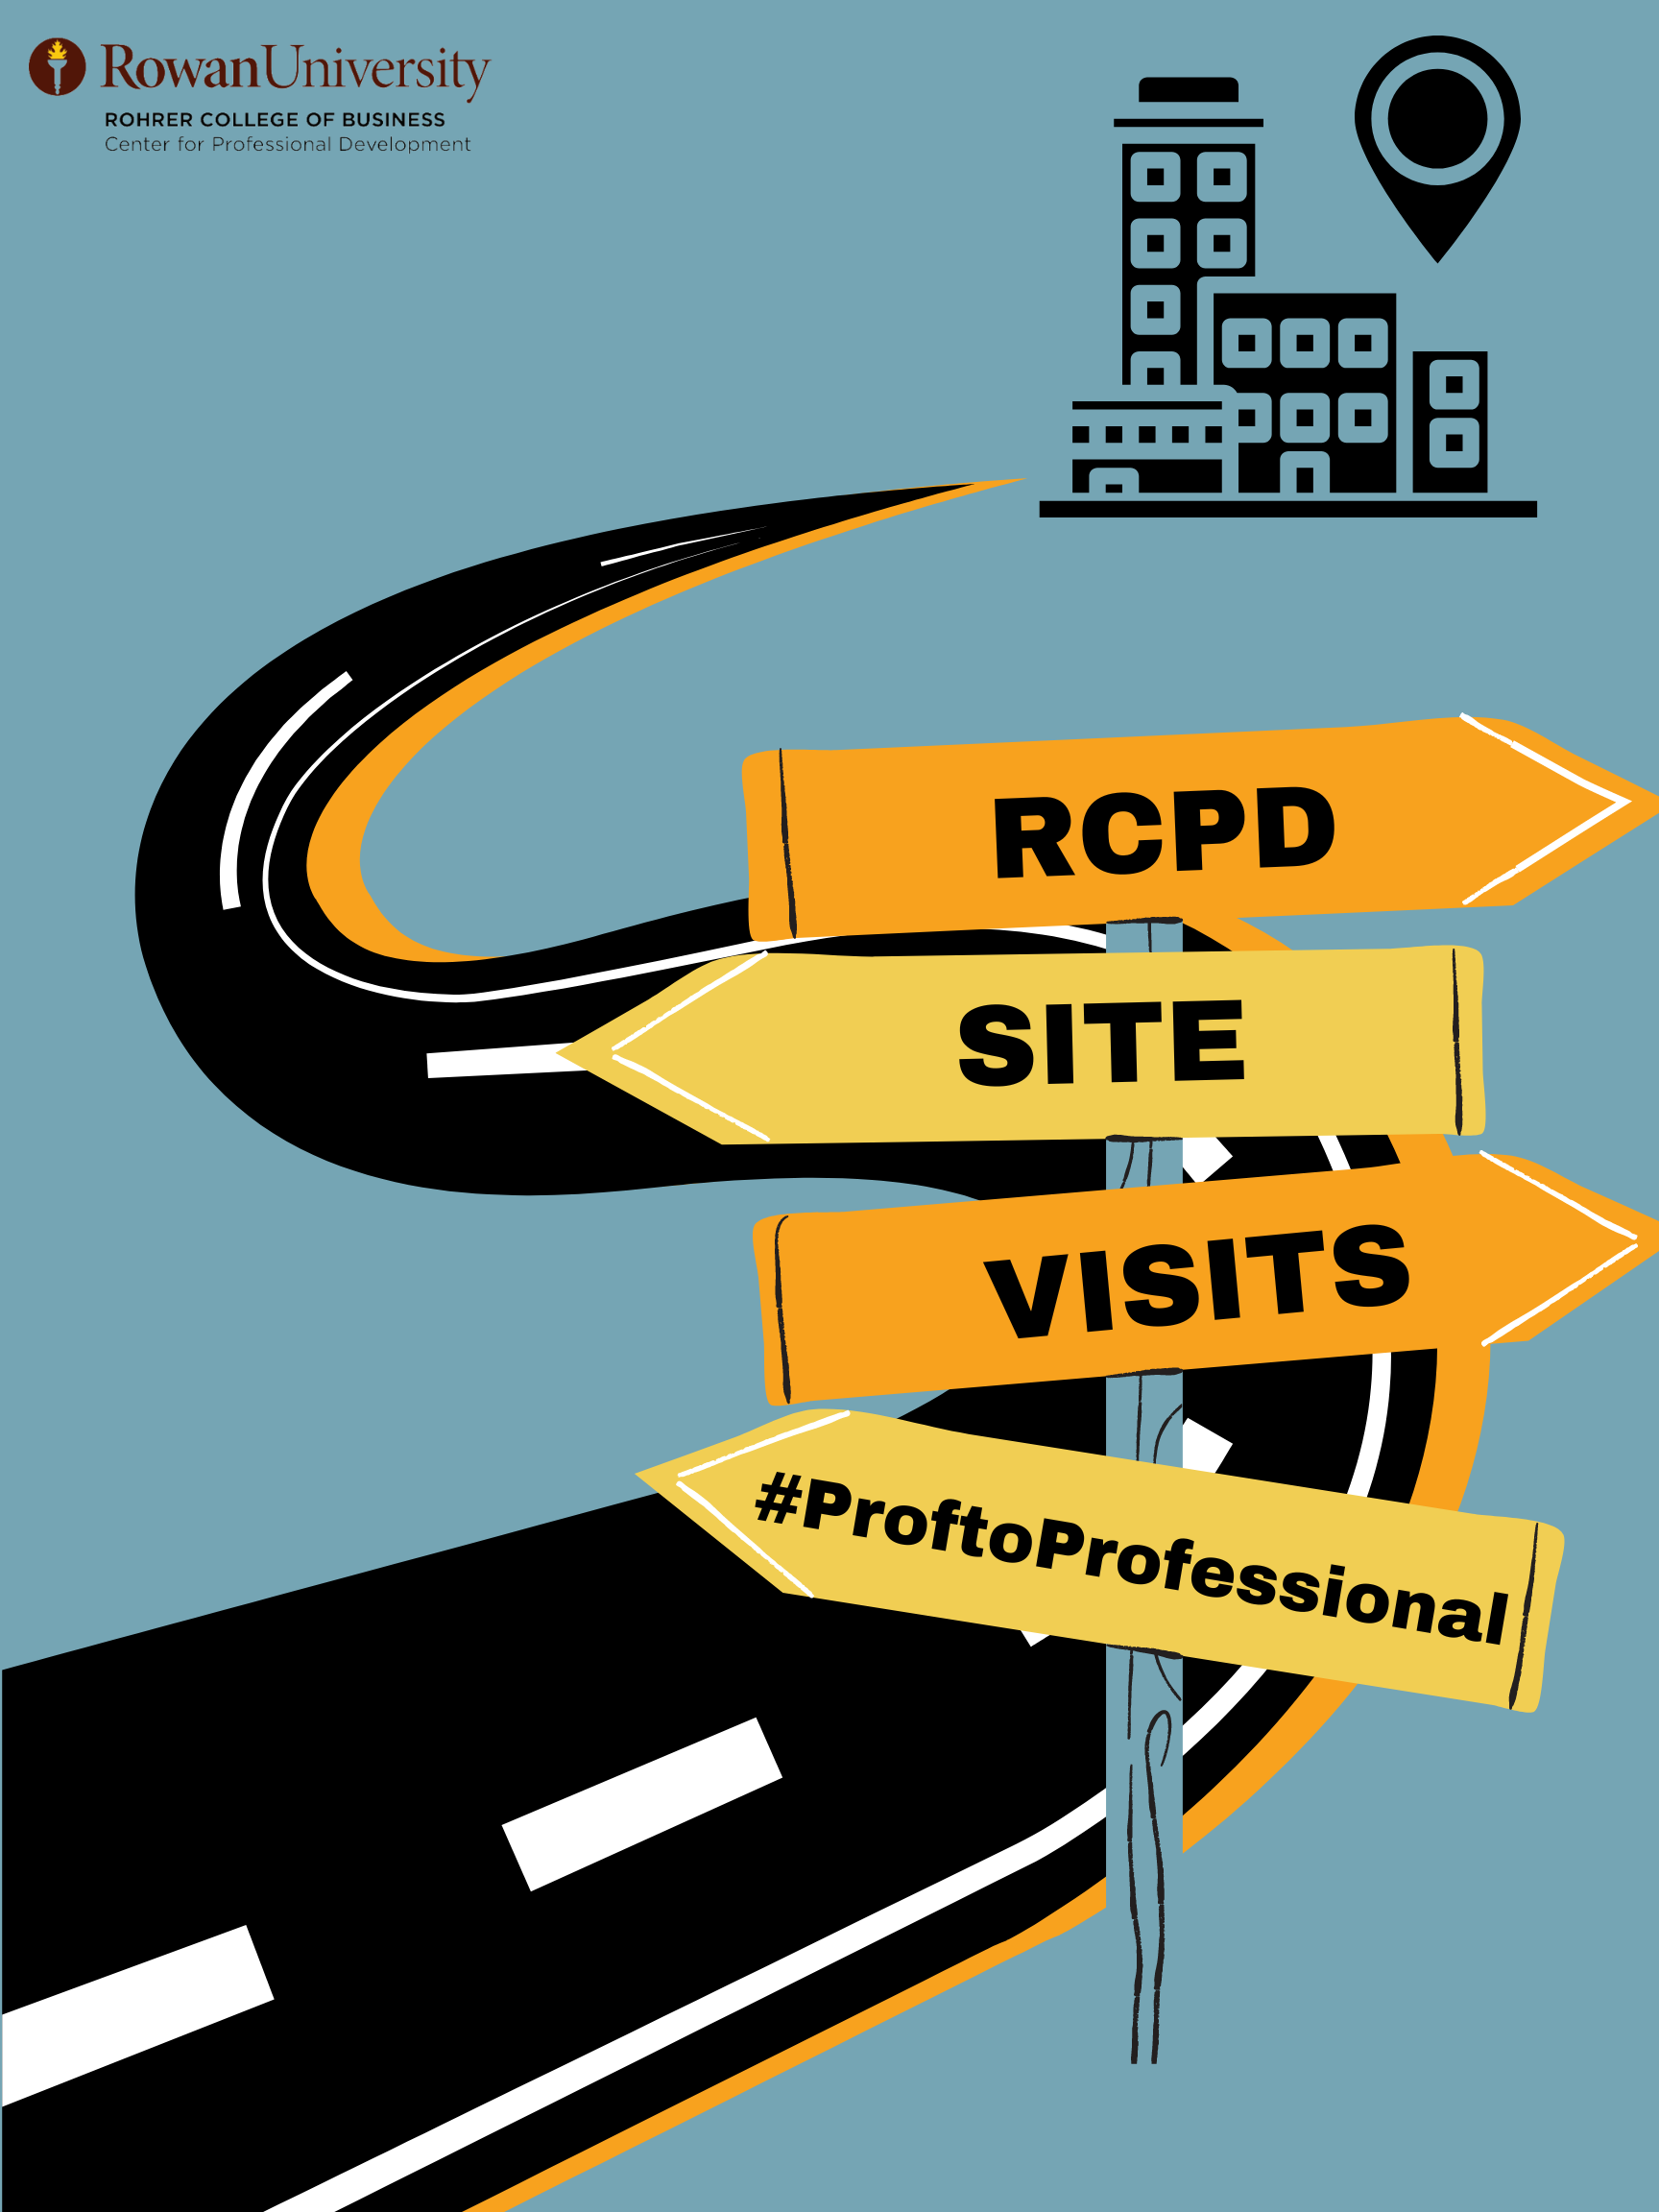 RCPD Site Visits